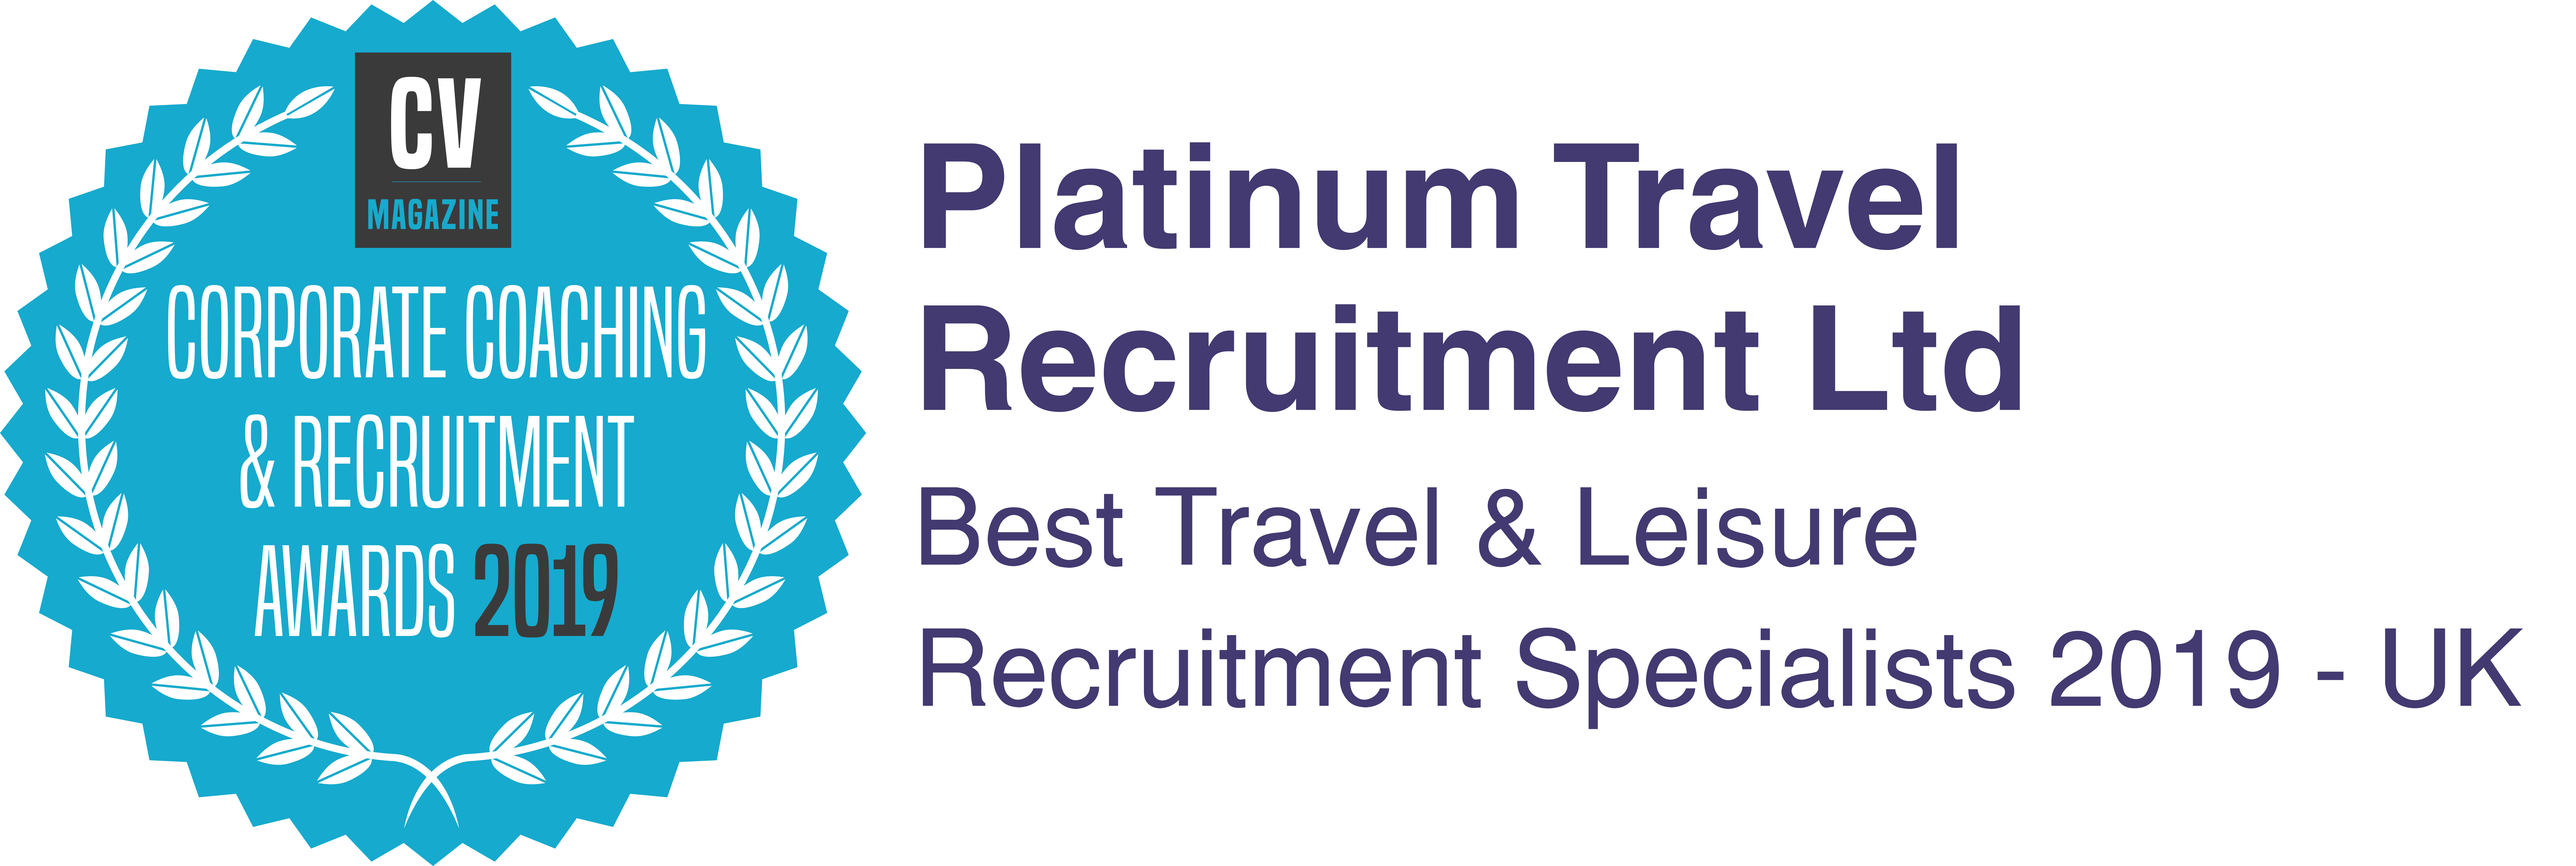 best travel and recruitment specialists 2019